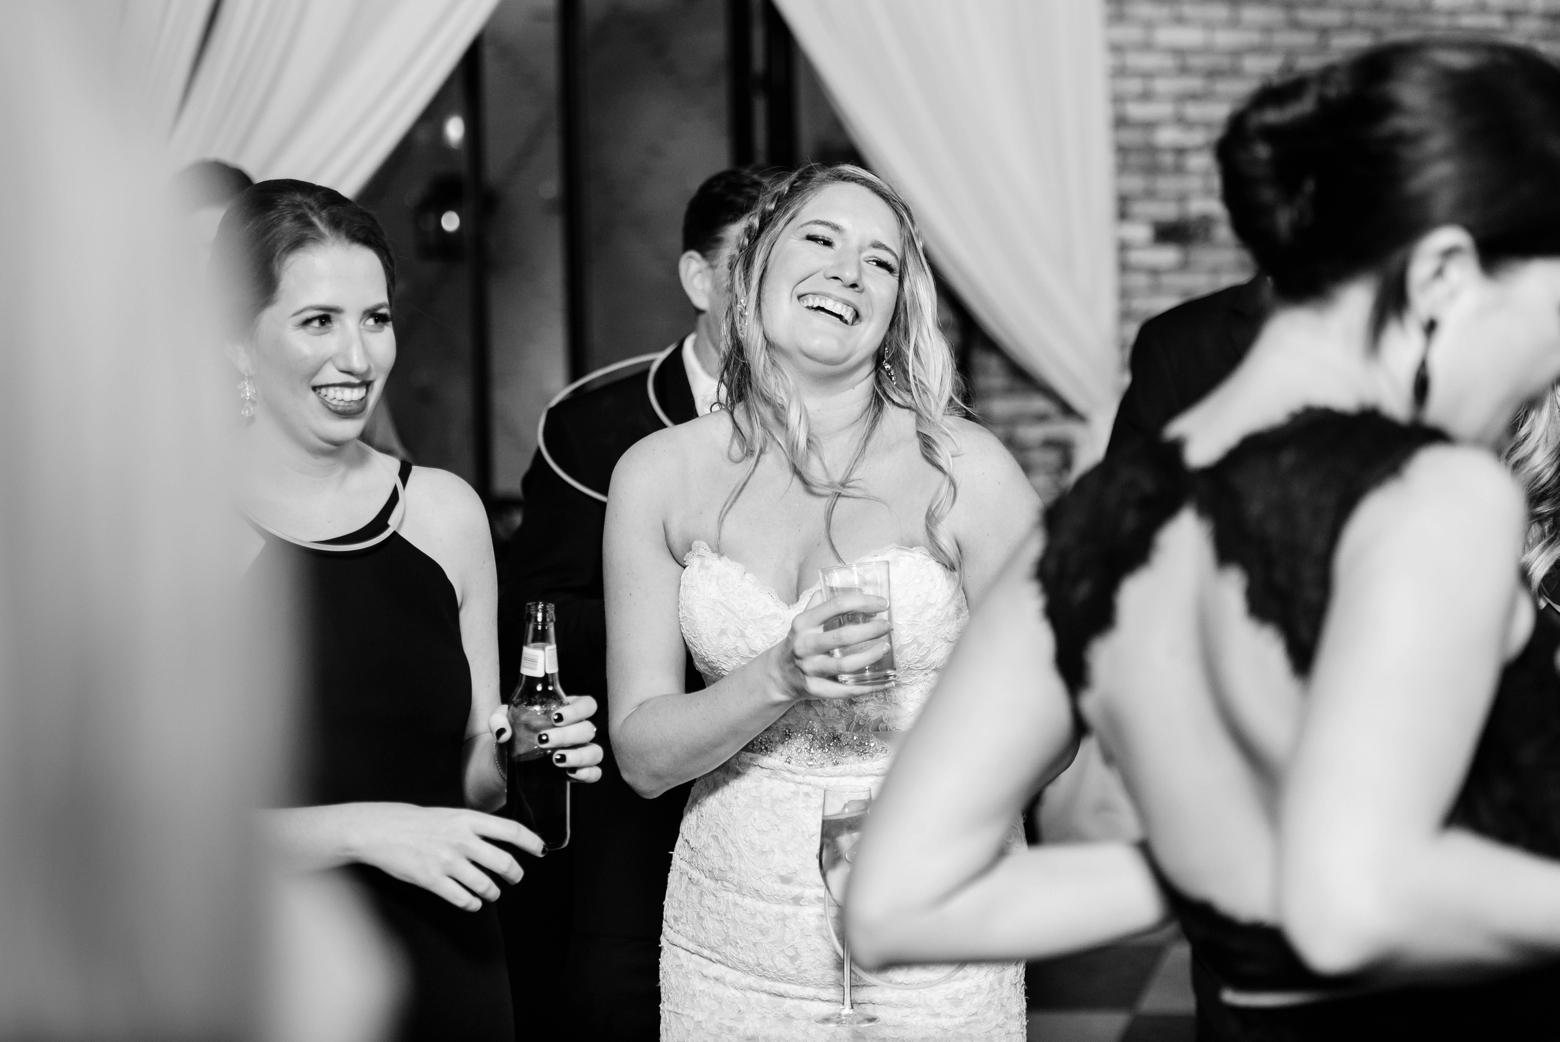 The Bride laughs during the reception of her oxford exchange wedding day